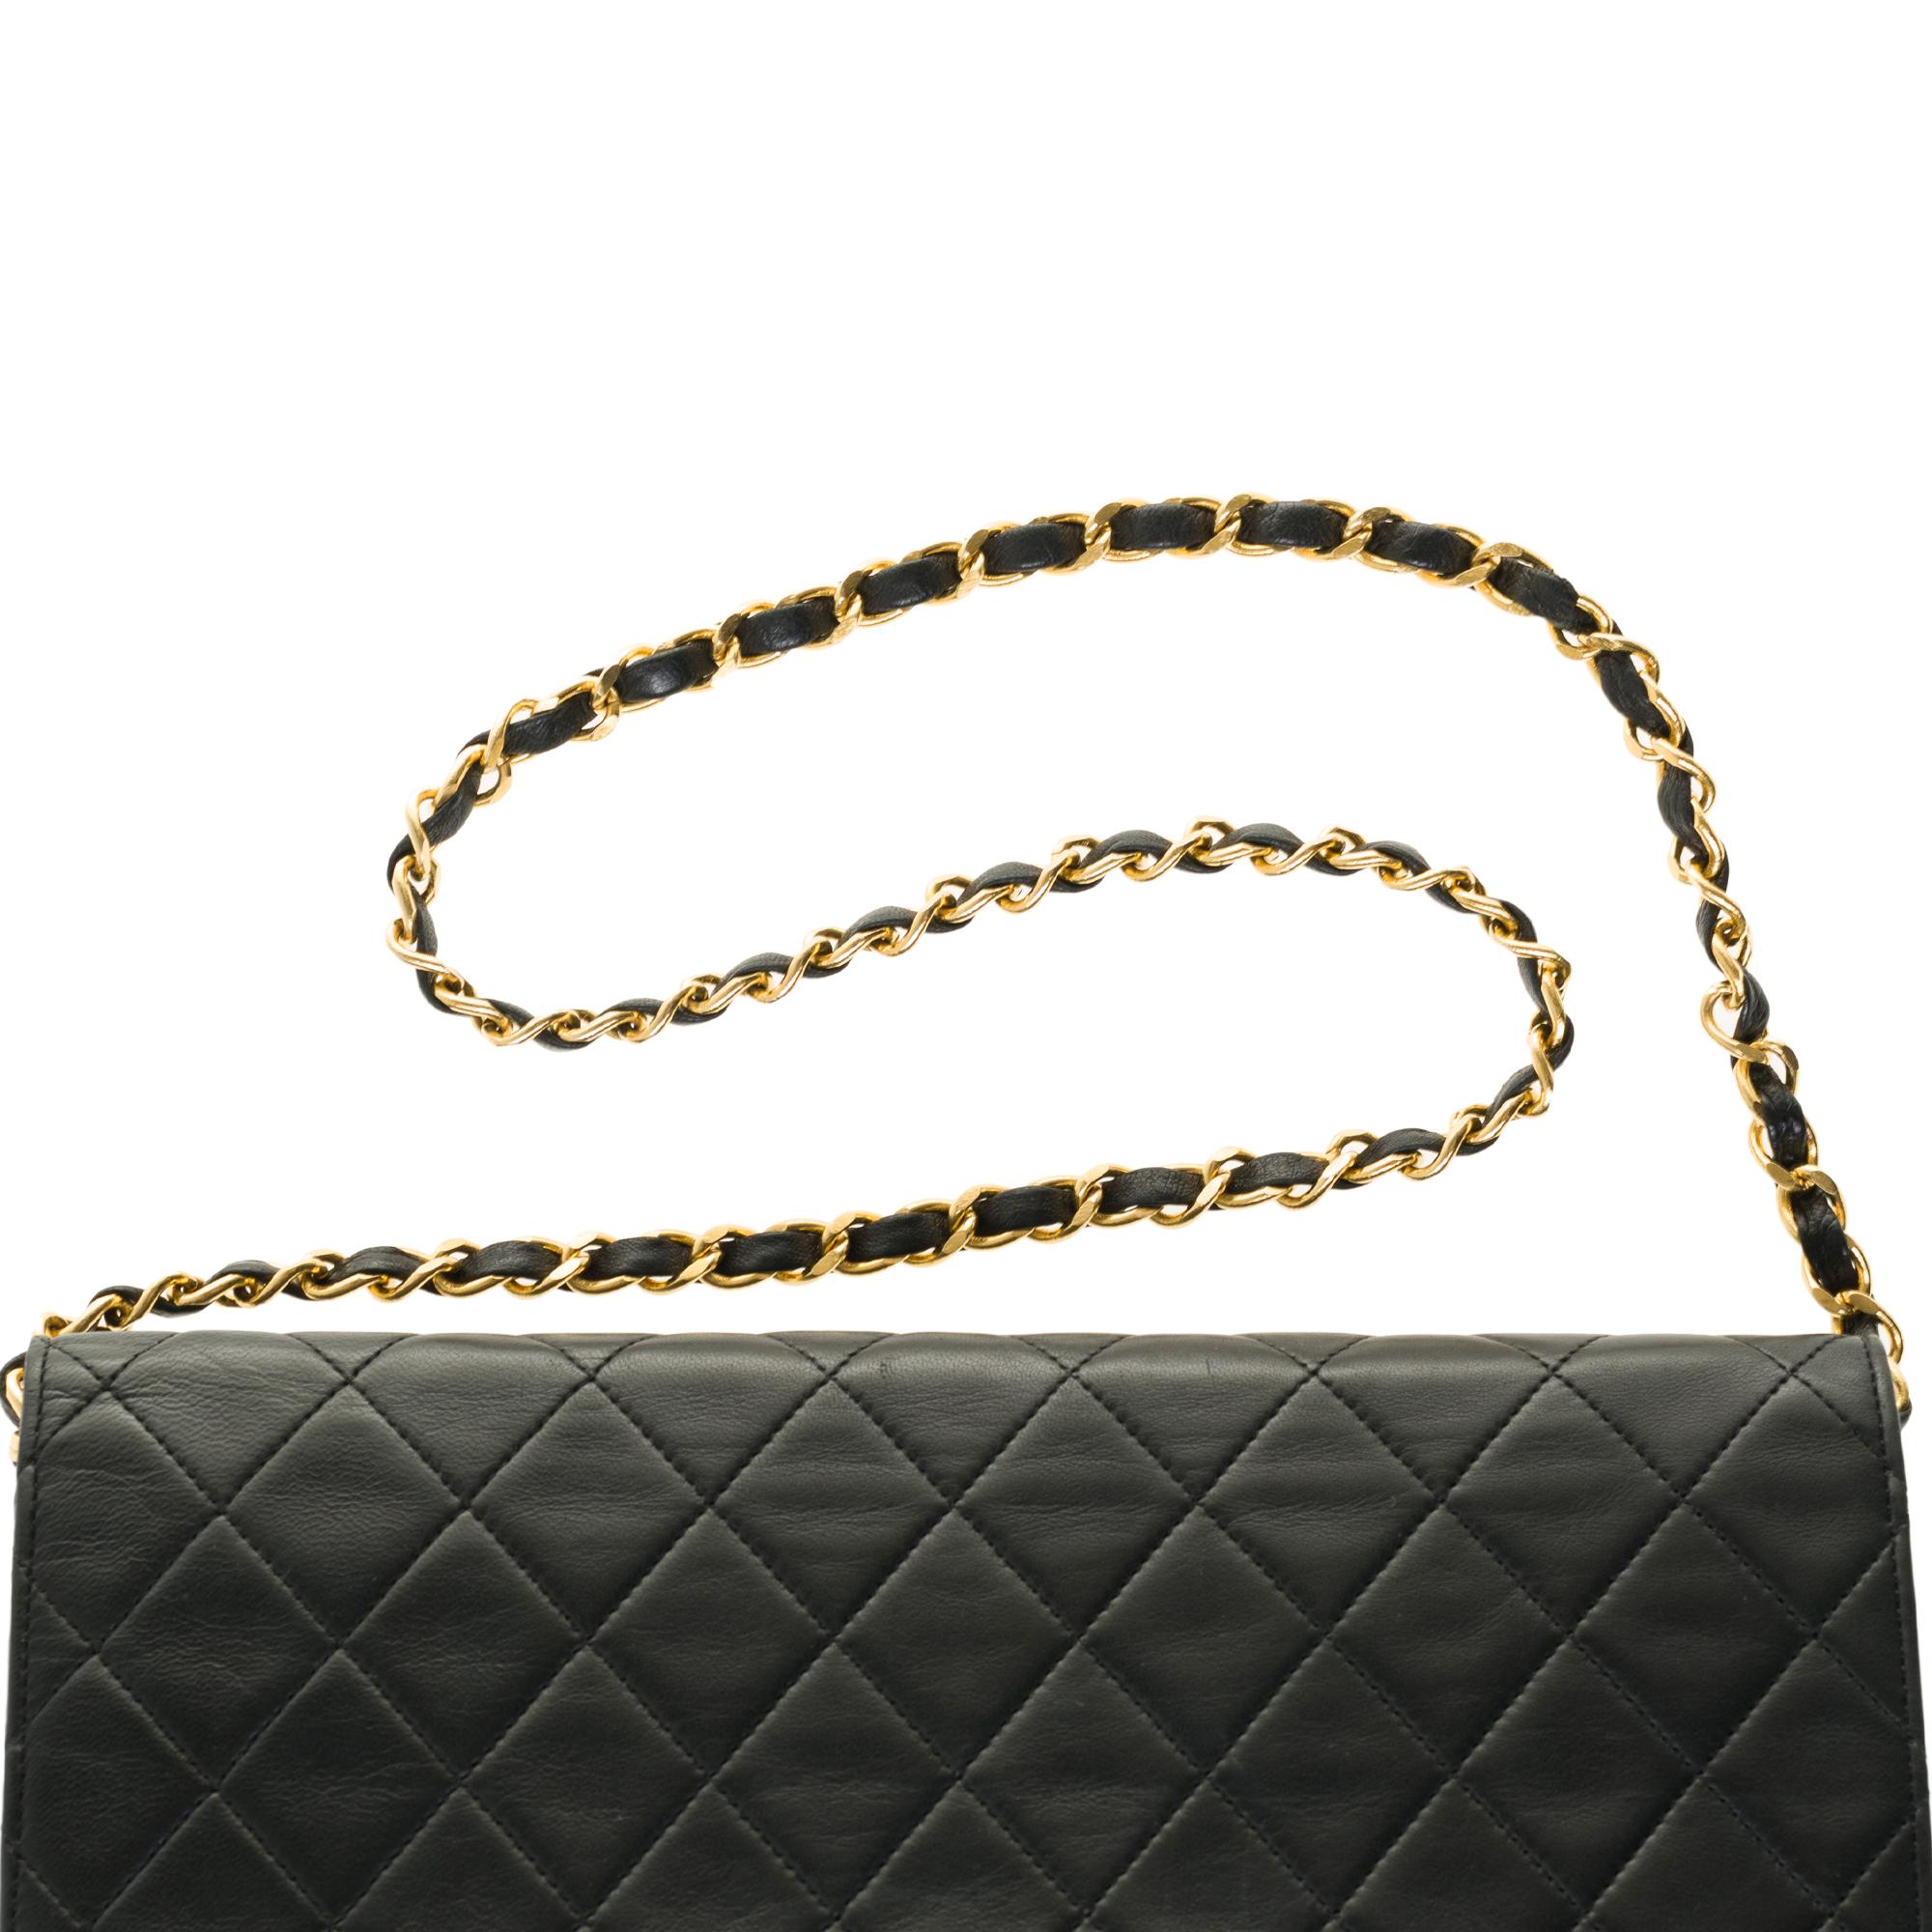 Stunning Chanel Classic handbag in black quilted lambskin with gold hardware 2